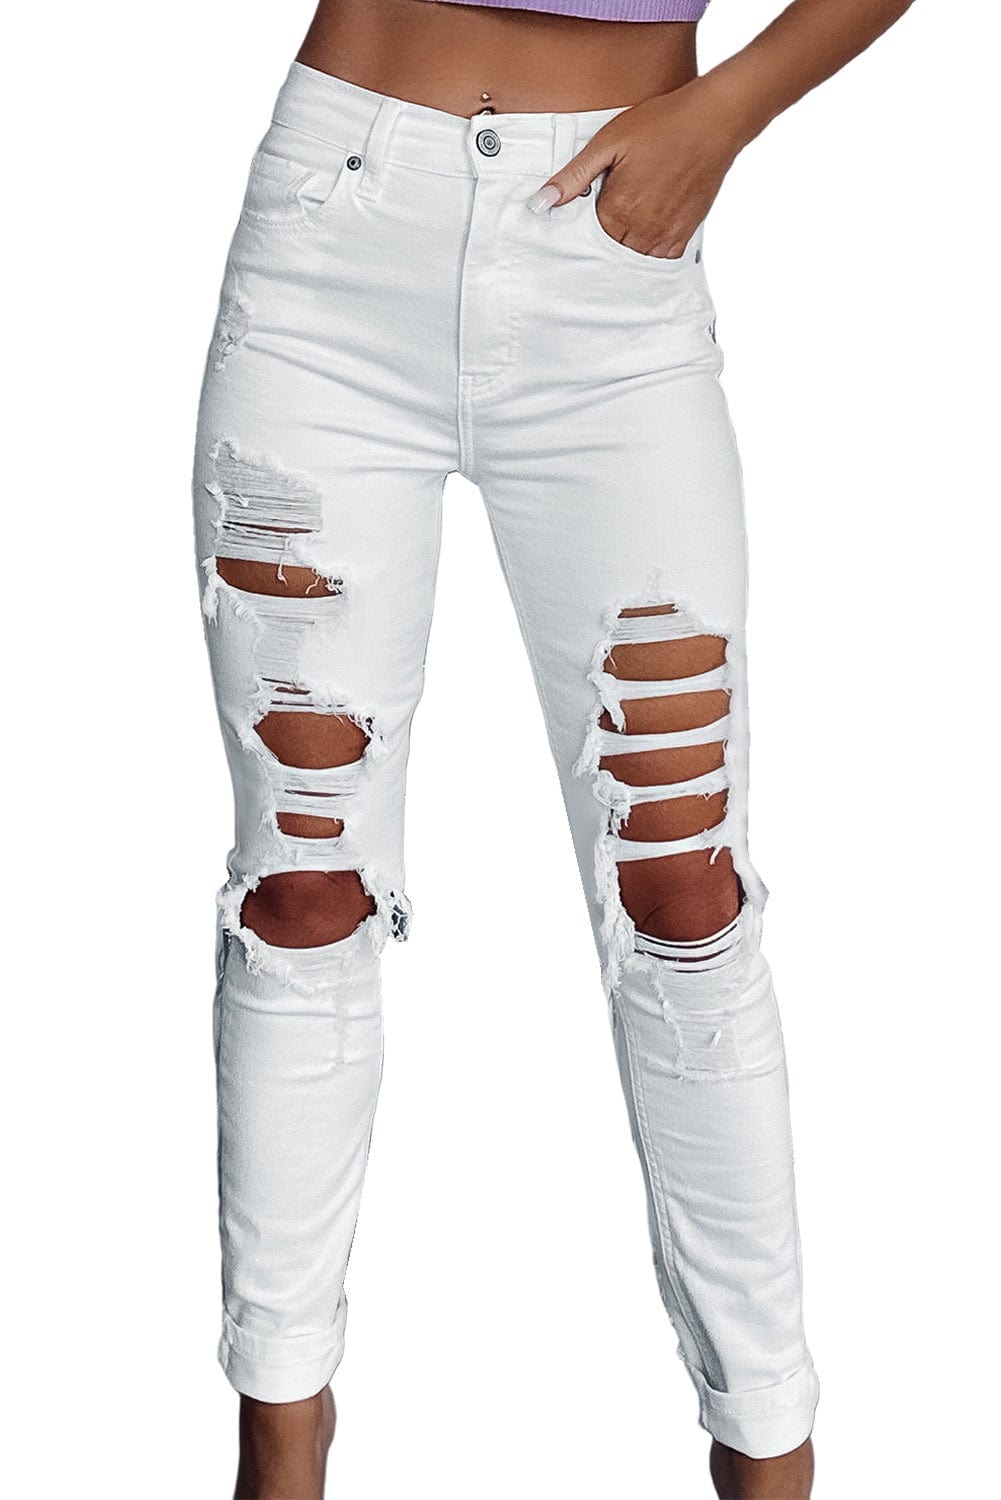 The802Gypsy  Bottoms TRAVELING GYPSY-White Distressed High Waist Skinny Jeans